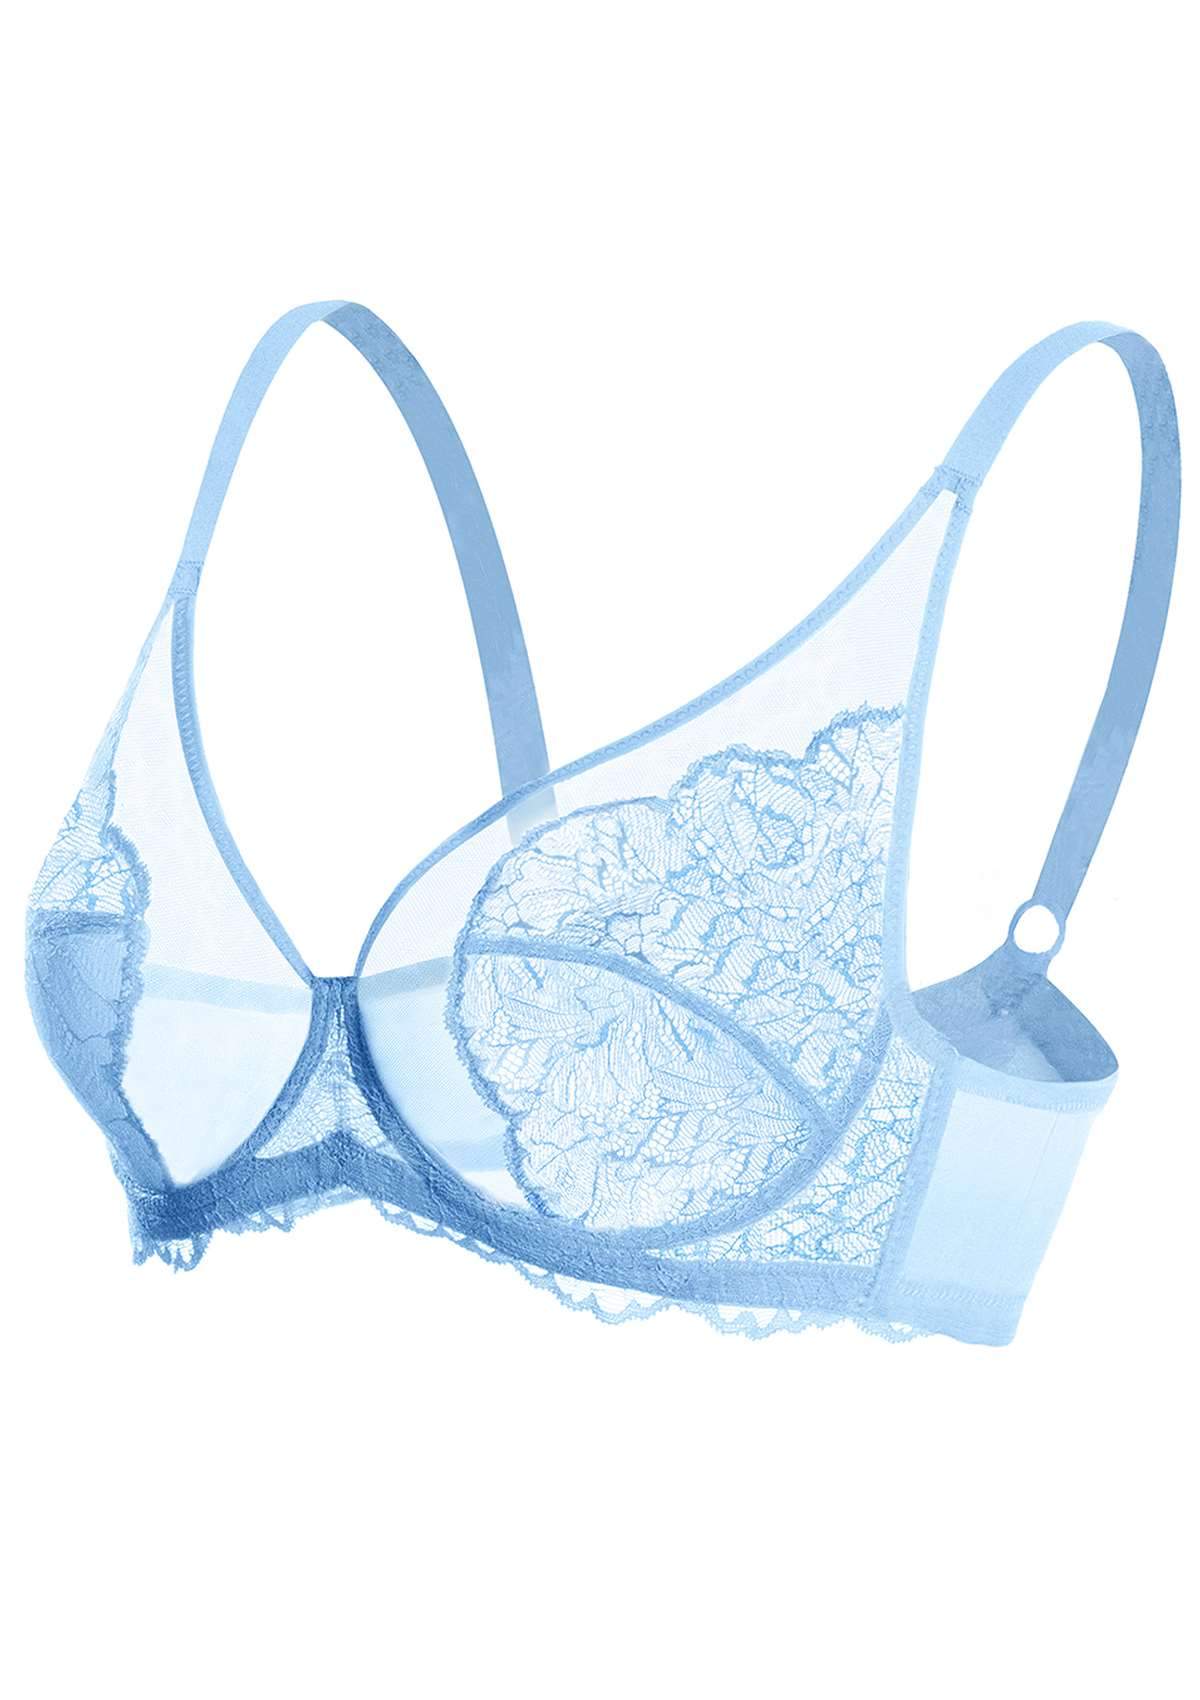 HSIA Blossom Full Coverage Supportive Unlined Underwire Bra Set - Storm Blue / 32 / D